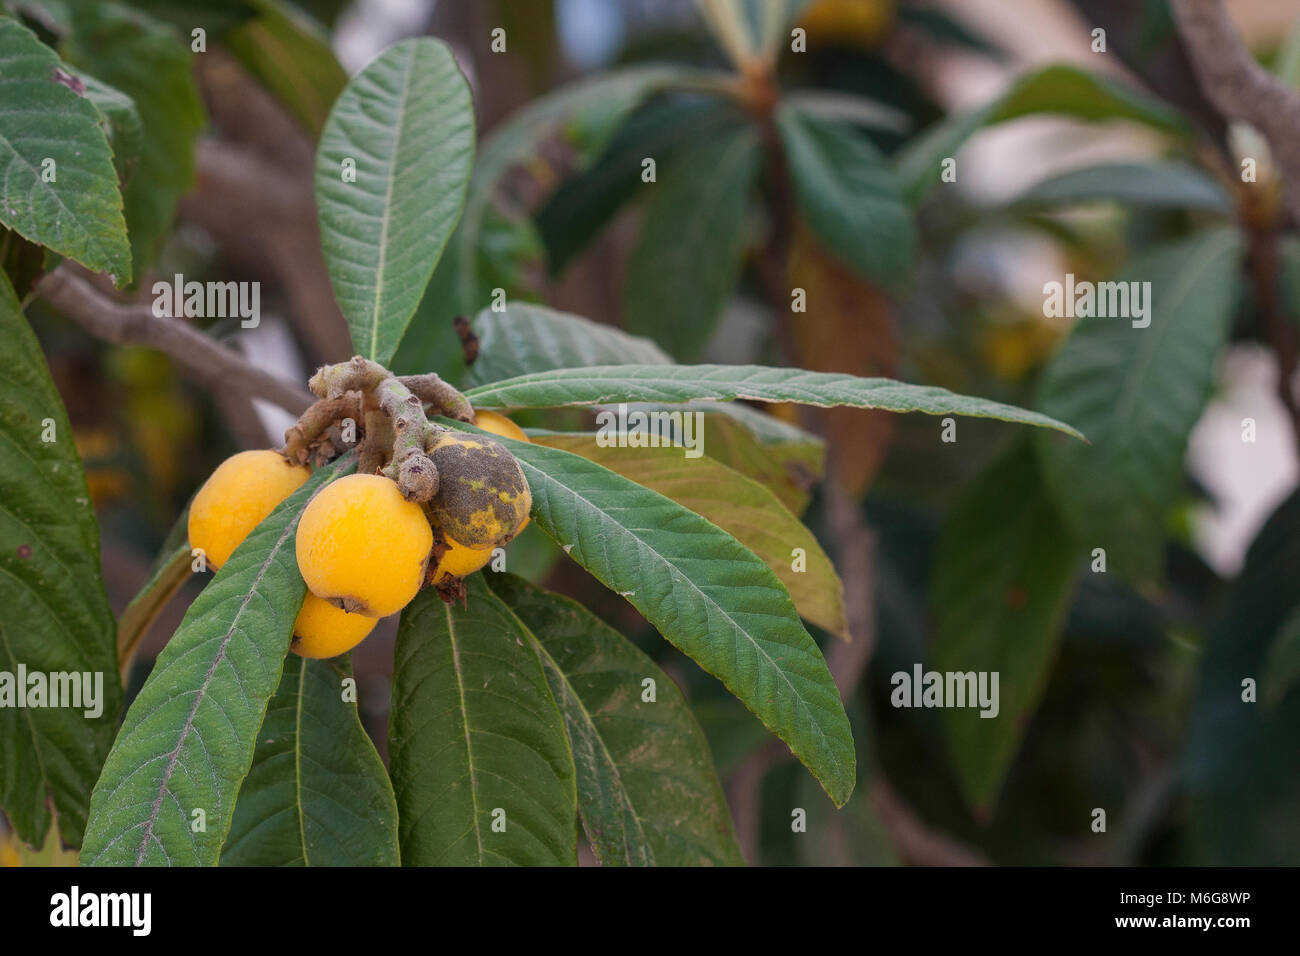 The loquat (Eriobotrya japonica) is a species of flowering plant in the family Rosaceae, a native to the cooler hill regions of China to south-central China. Edible fruit. Stock Photo